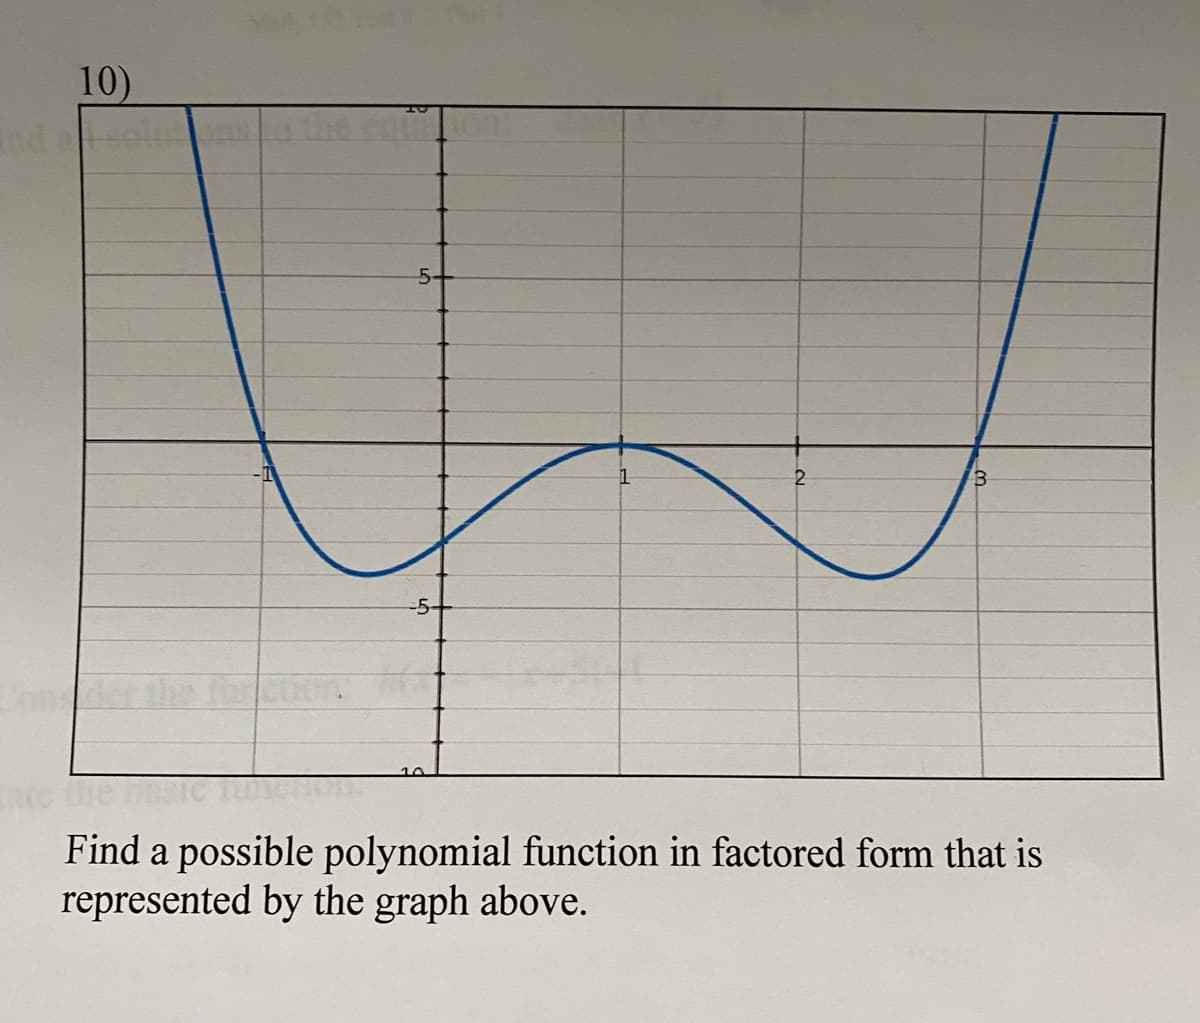 10)
nd
5-
-5-
der
10
Find a possible polynomial function in factored form that is
represented by the graph above.
